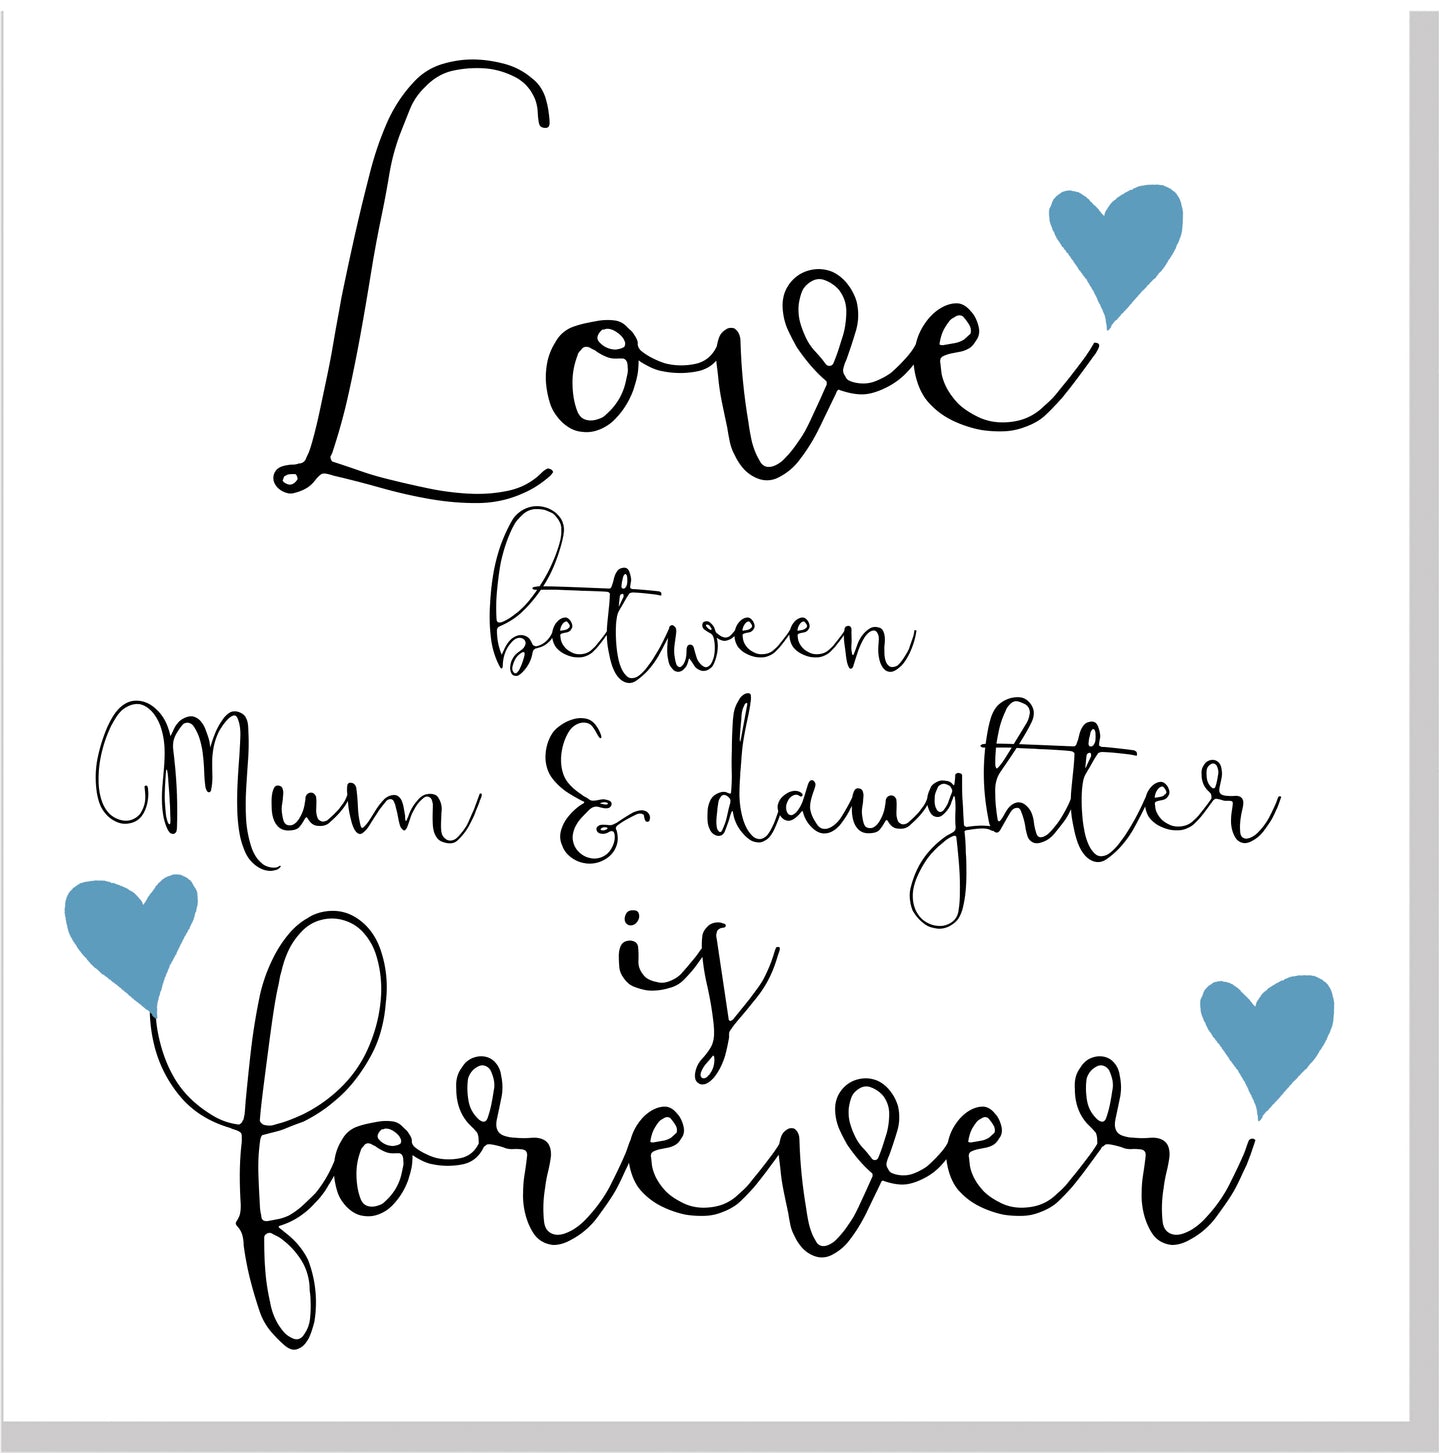 Mum & Daughter Forever blue hearts square card